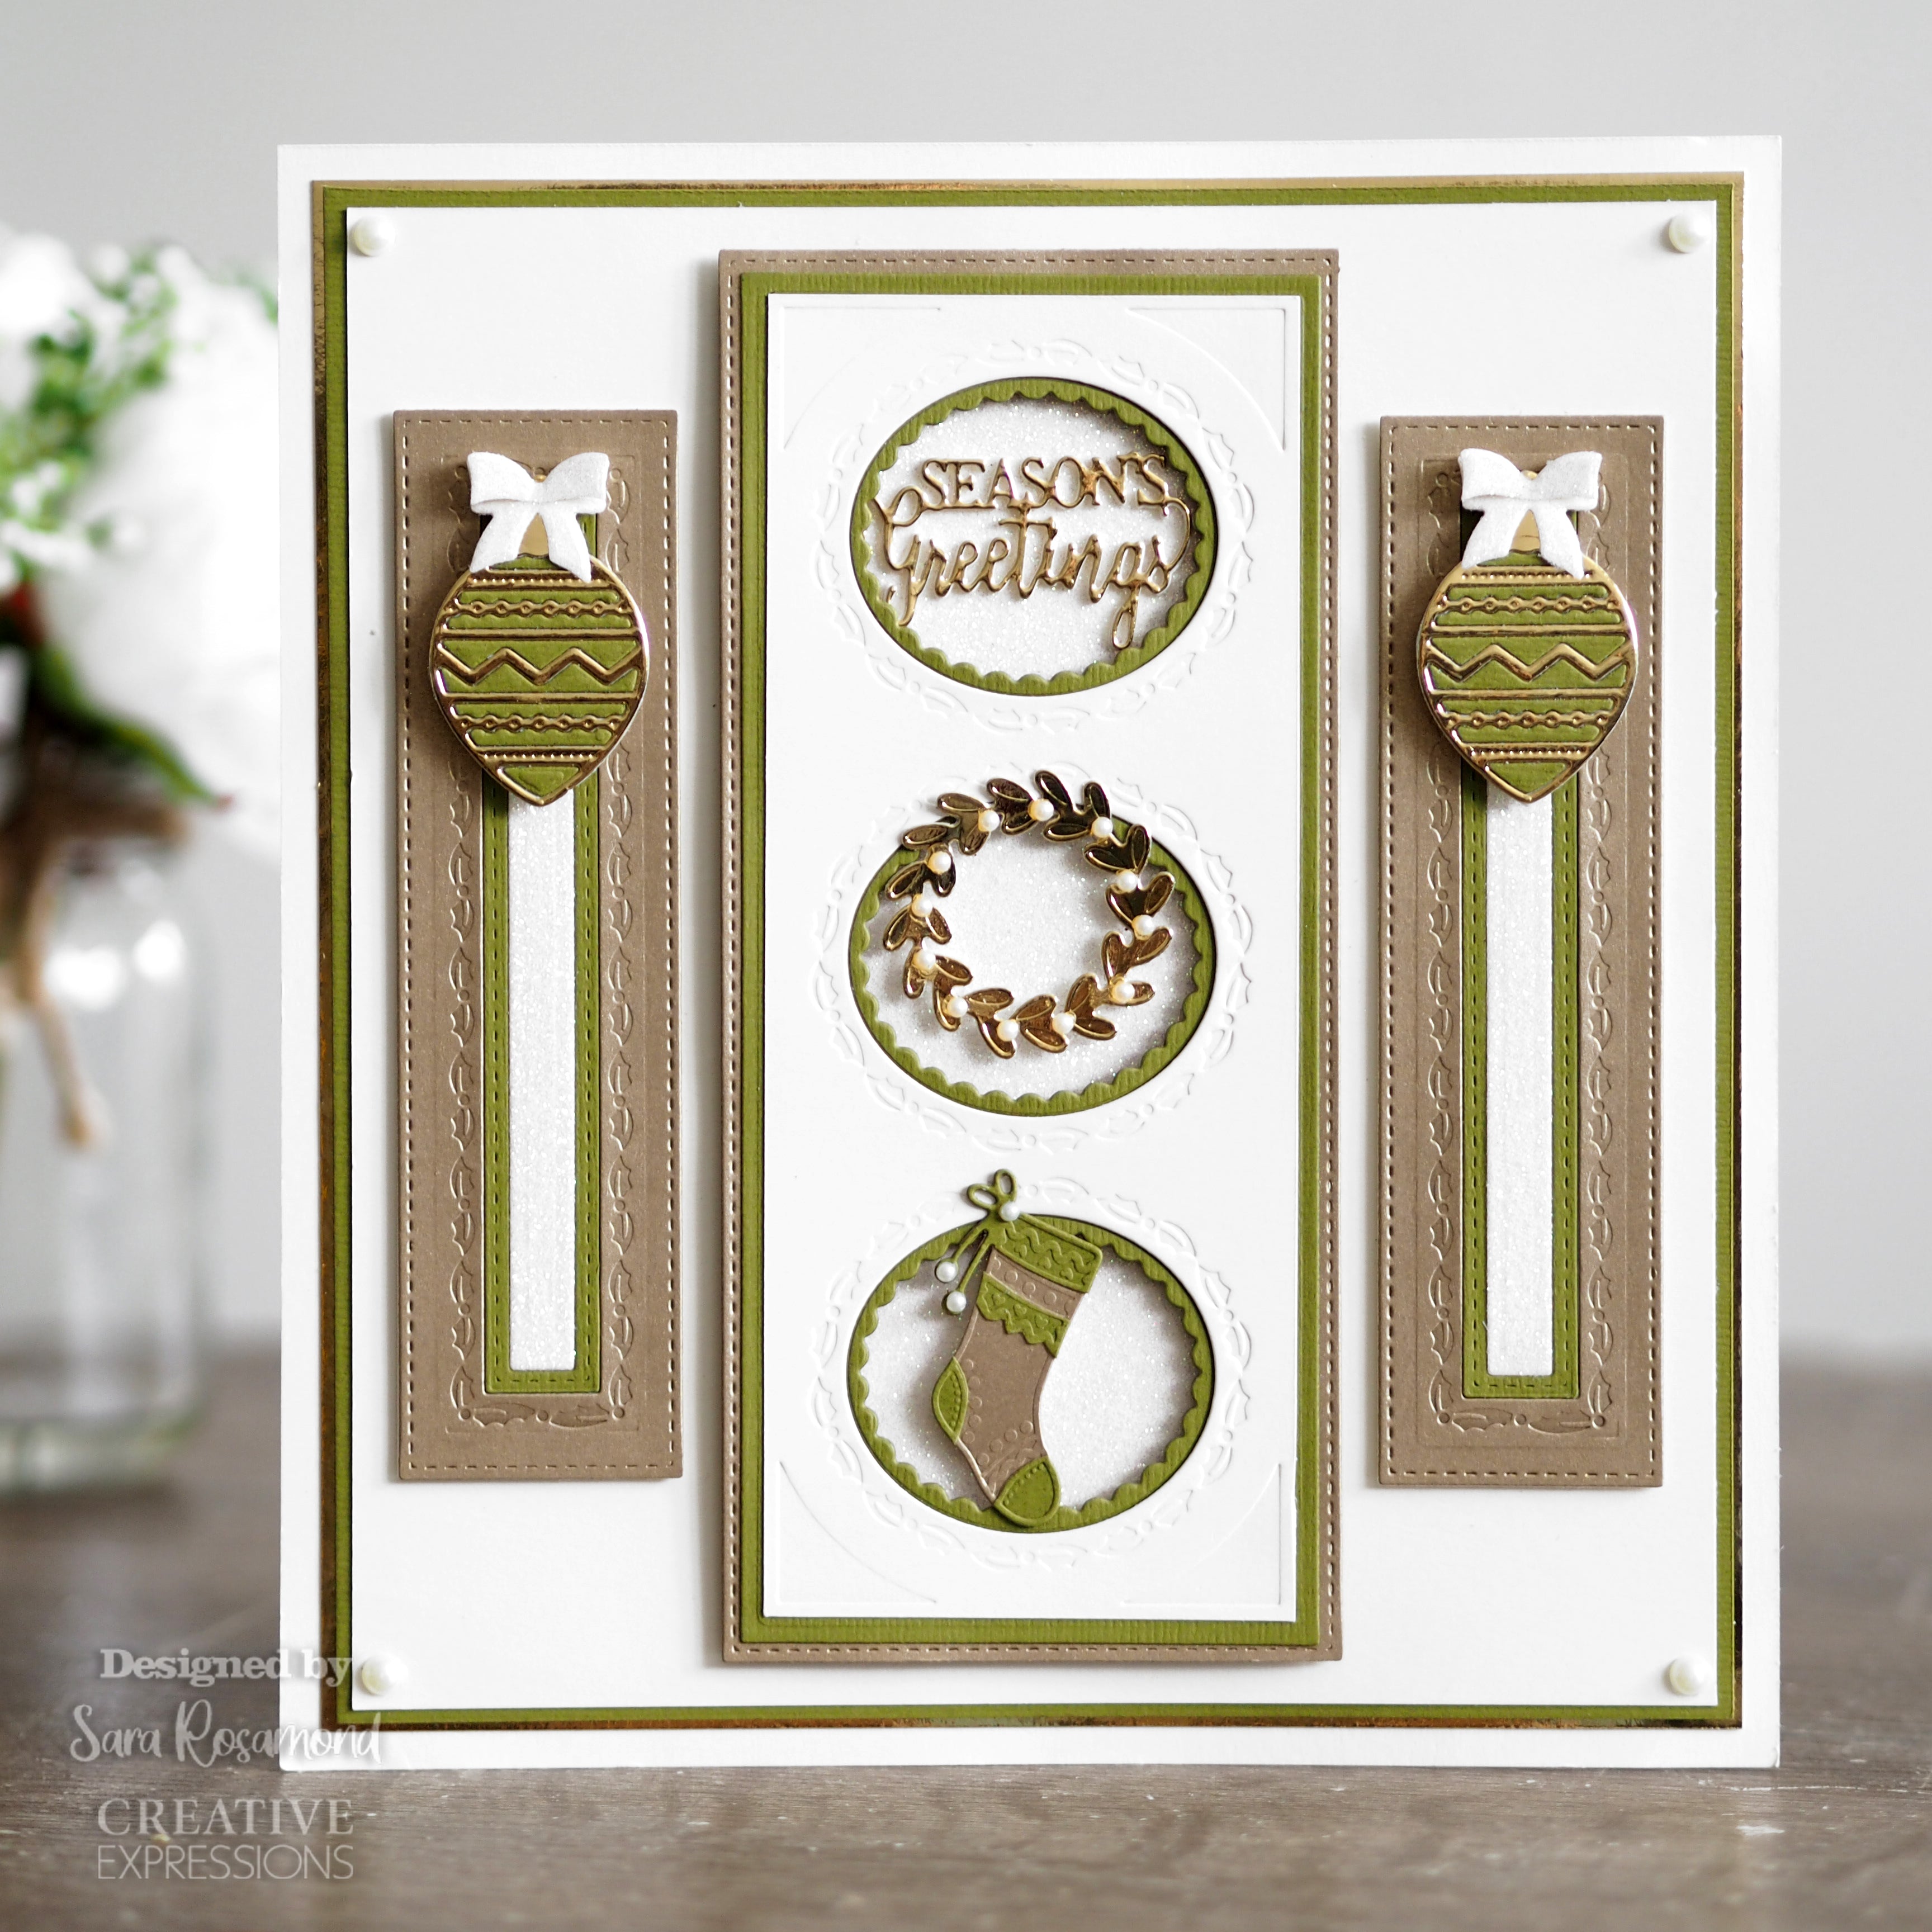 Creative Expressions Sue Wilson Mini Expressions Seasons Greetings Craft Die